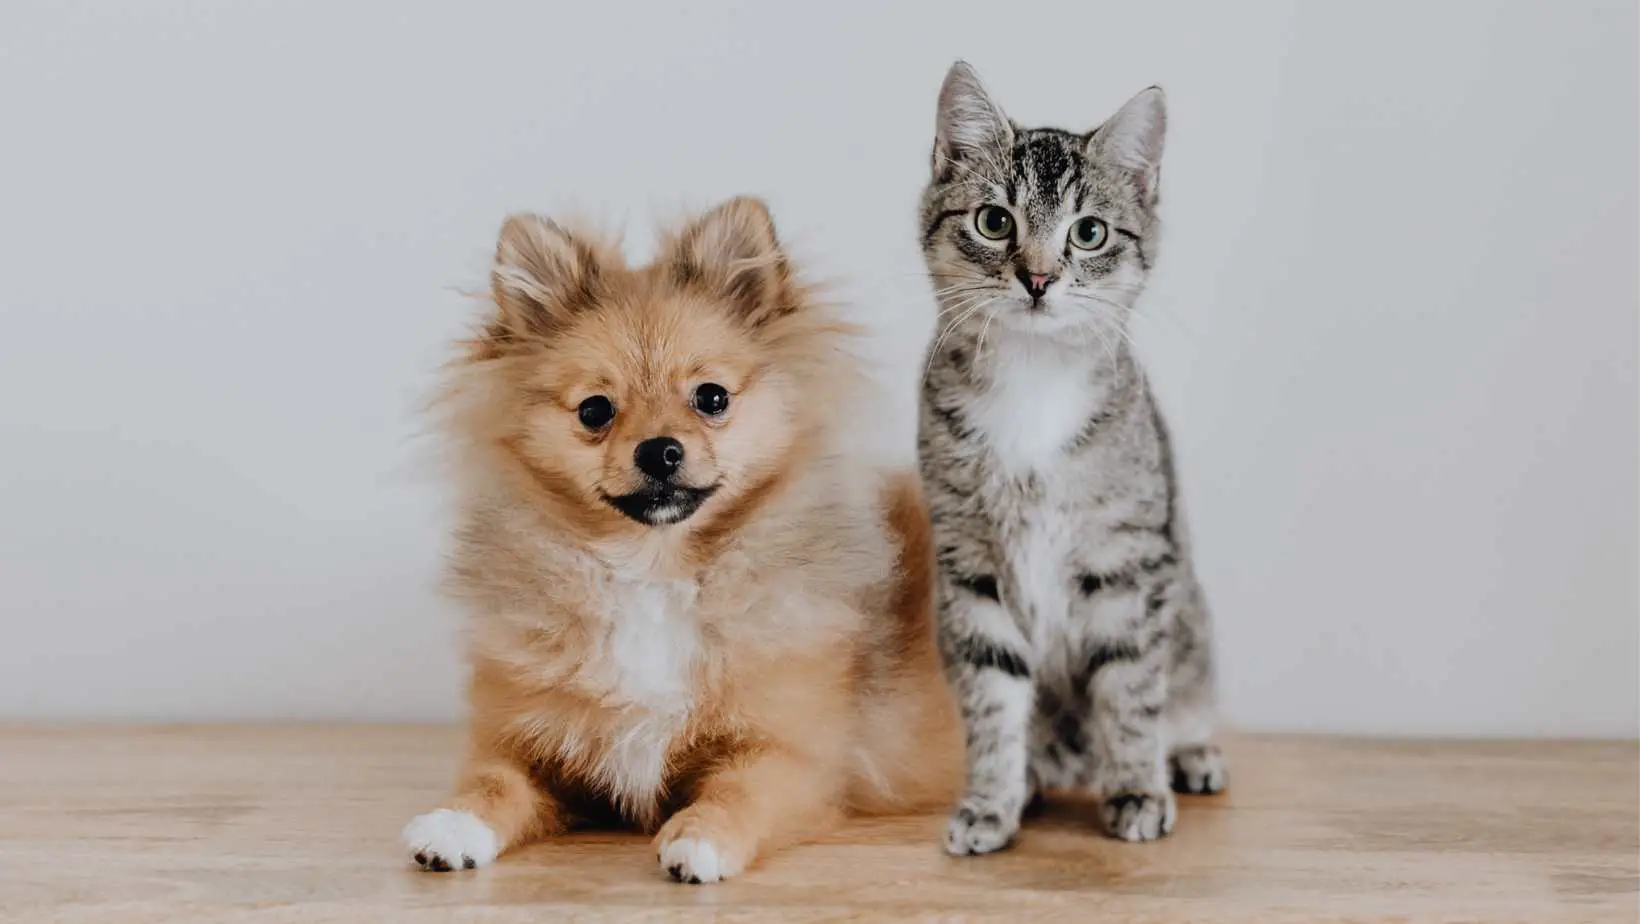 How Are Cats And Dogs Different?